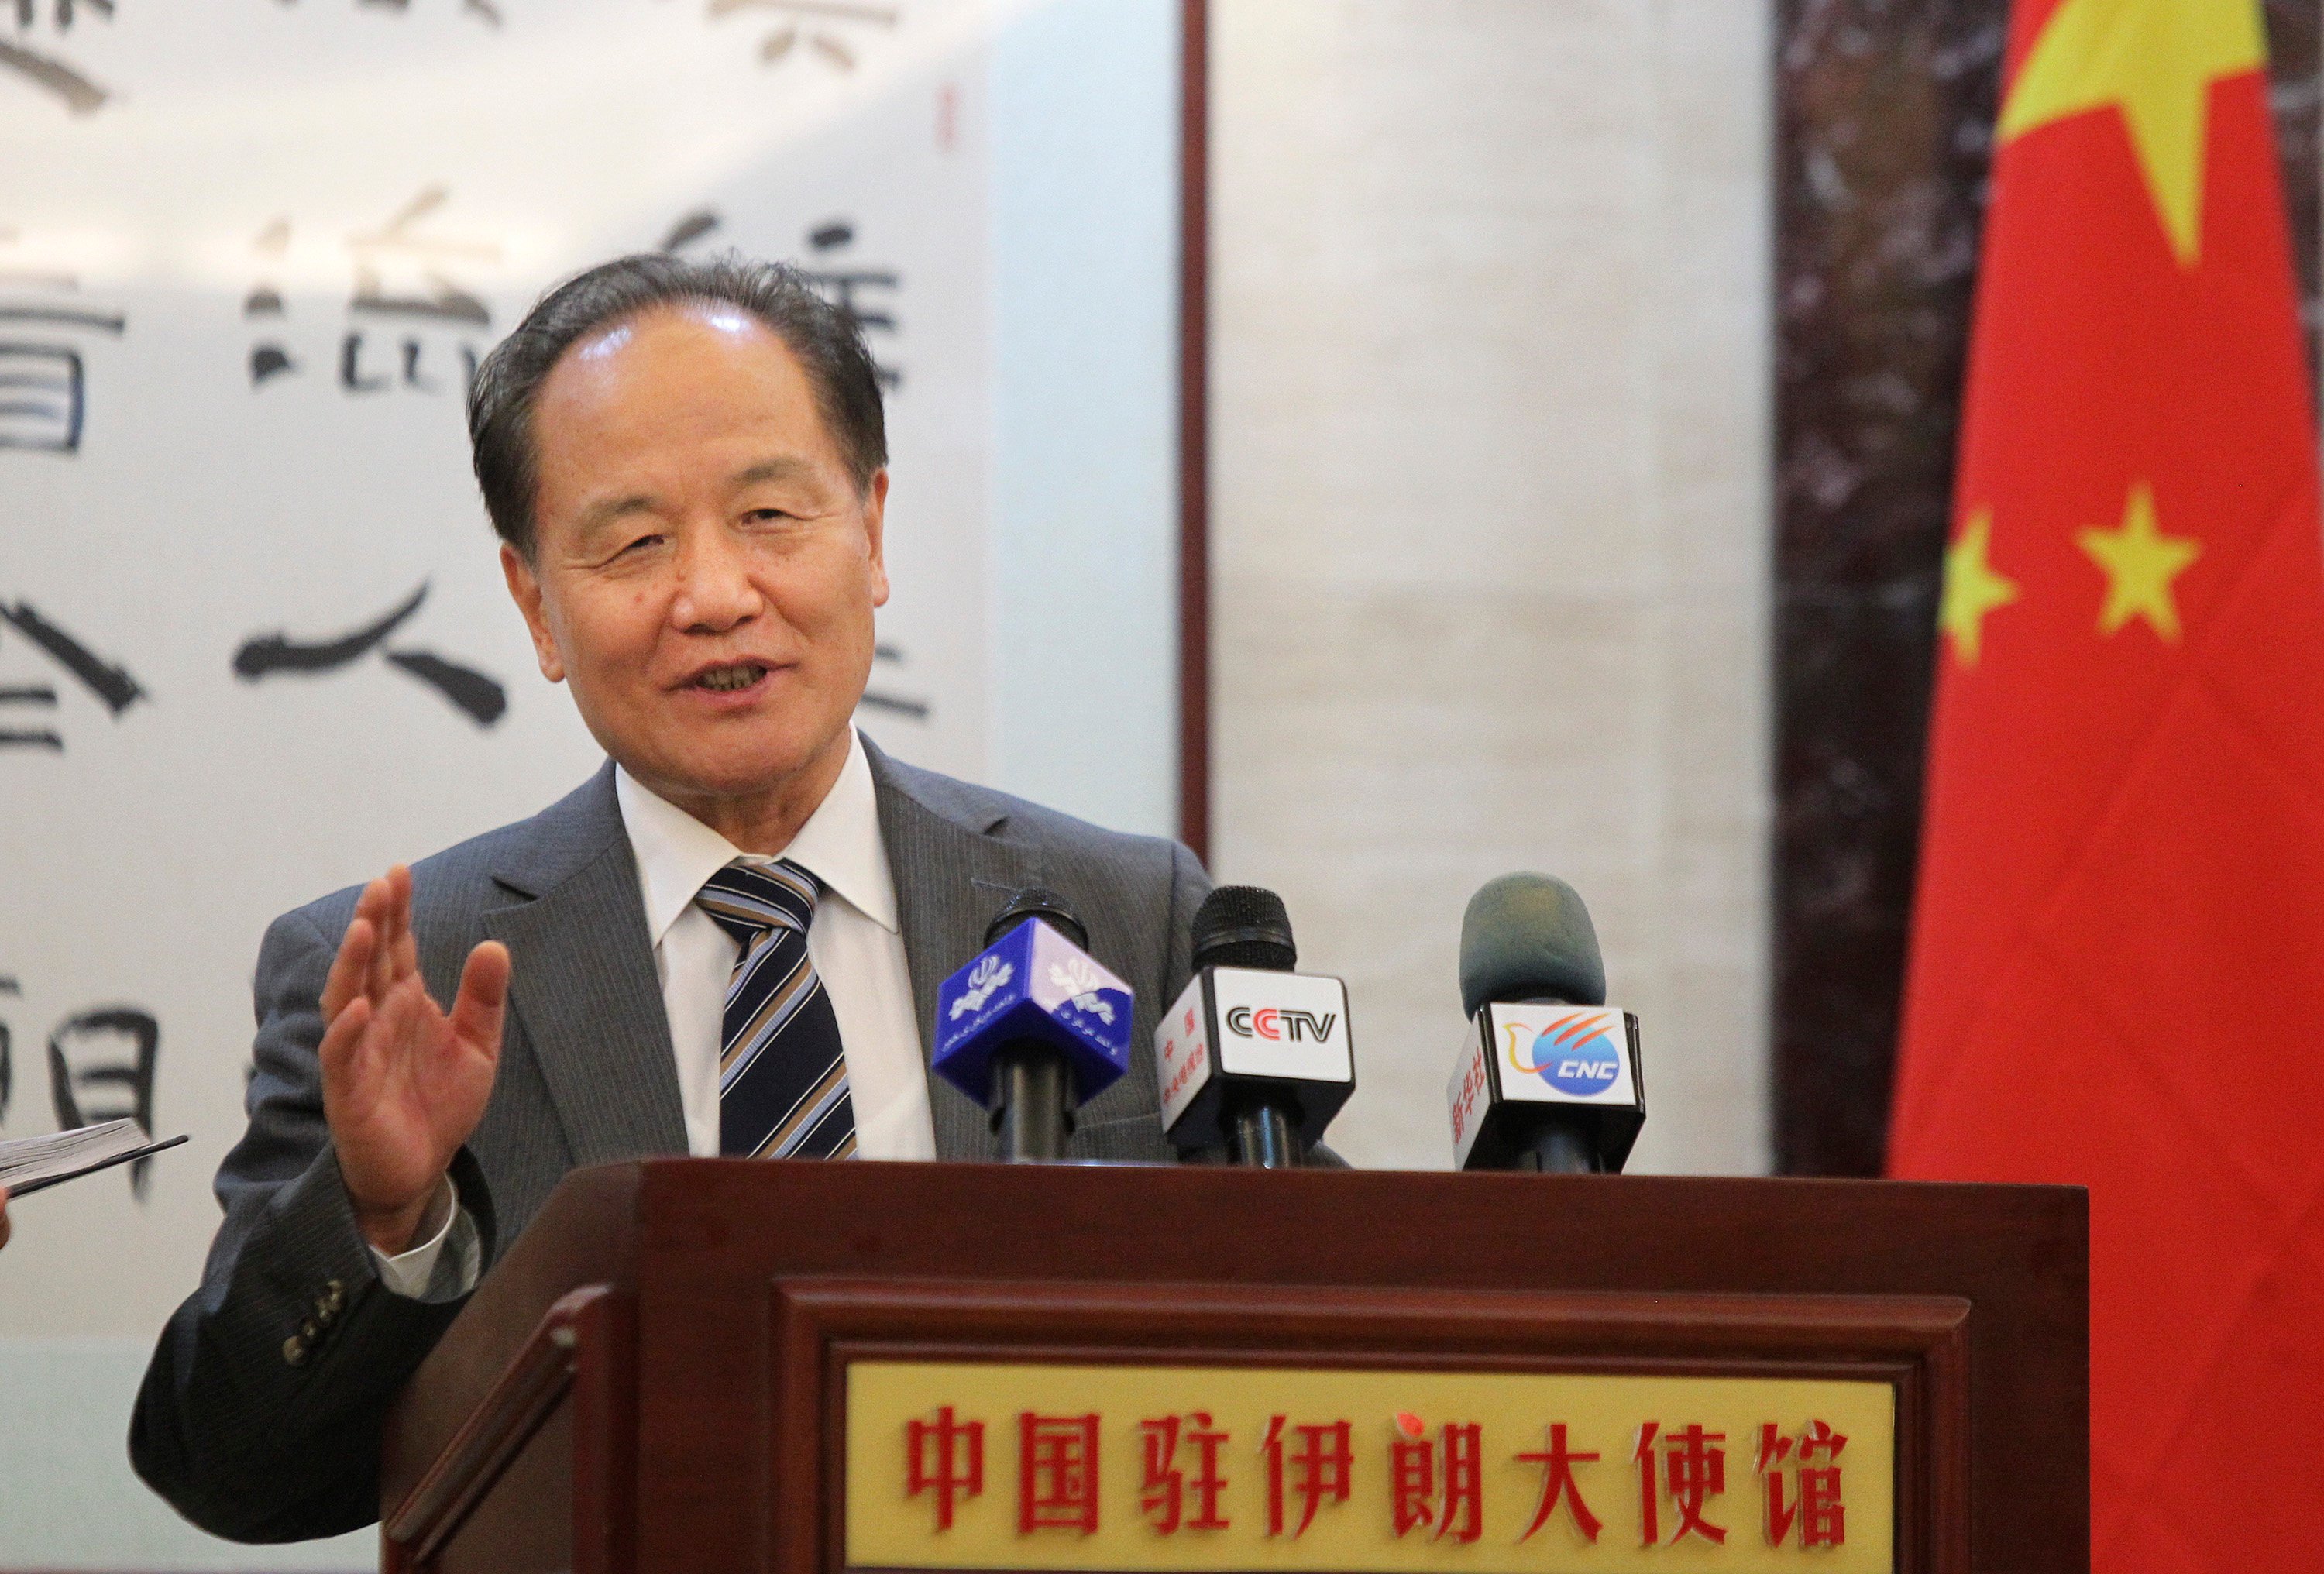 Wu Sike says the Middle East is where China has “strategic partners for our national rejuvenation”. Photo: Xinhua